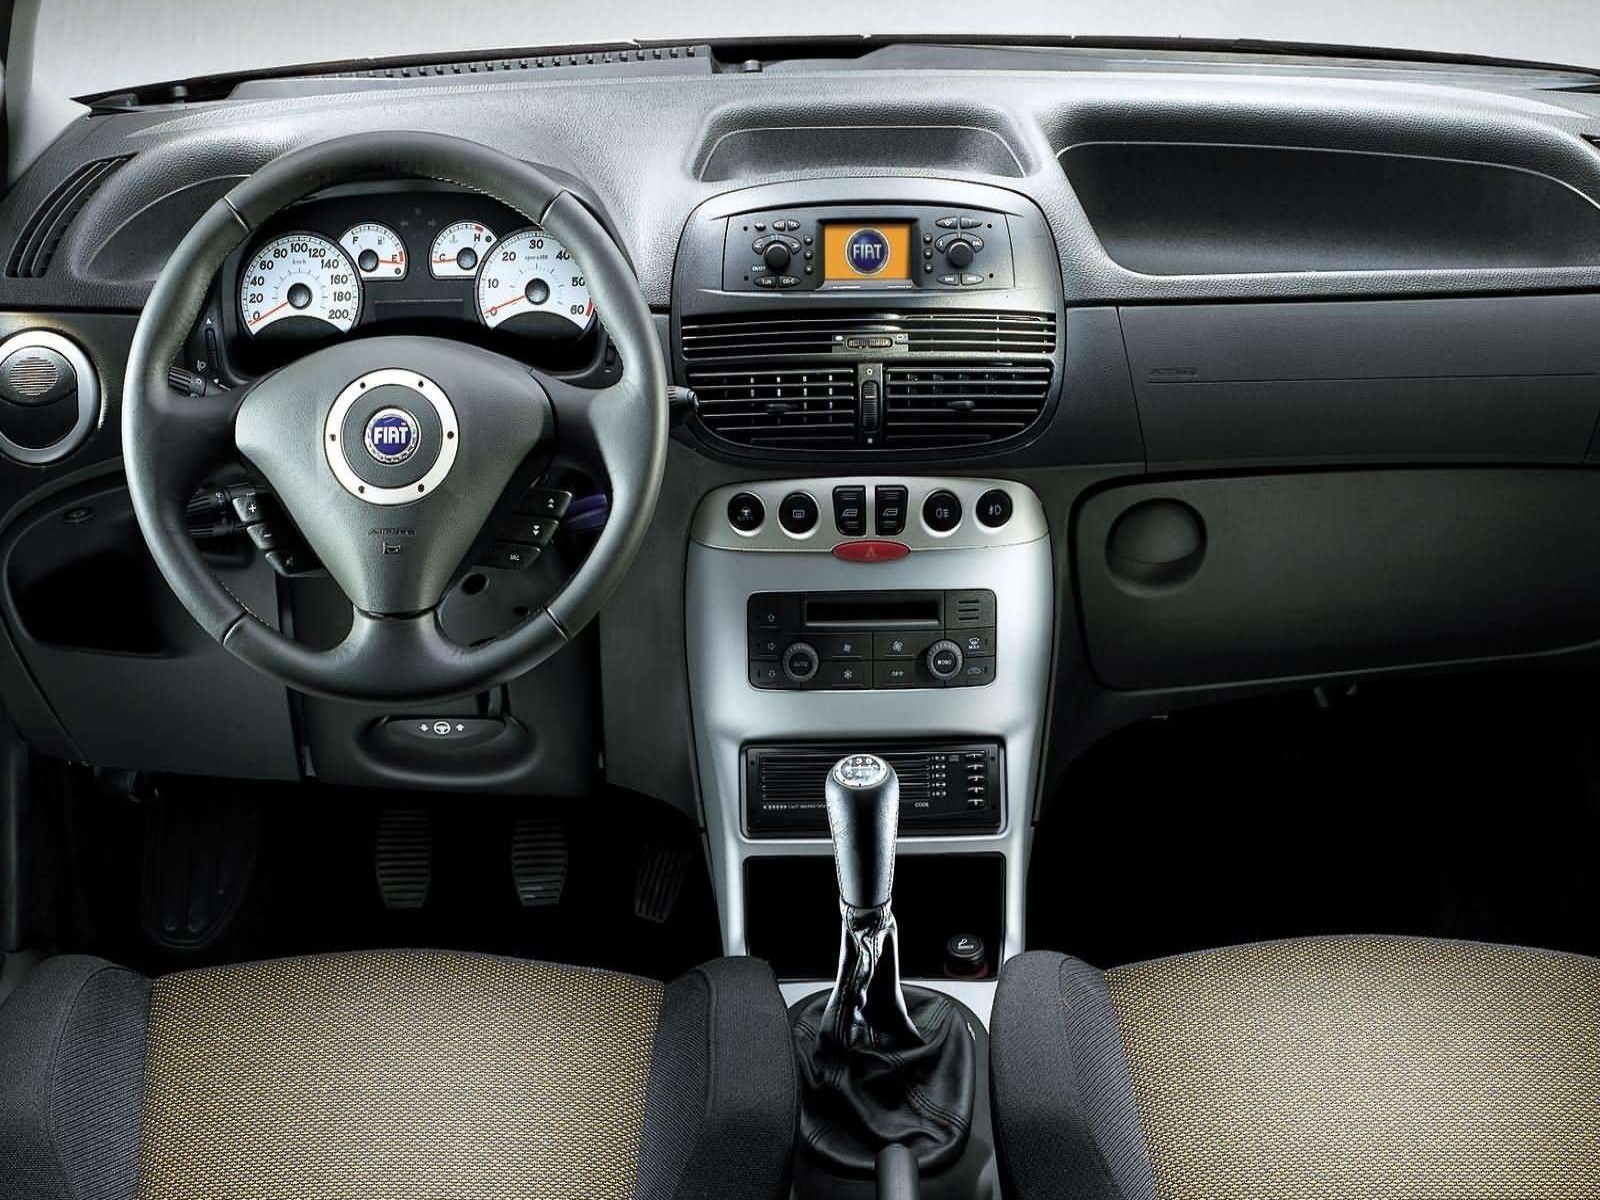 On this page we present you the most successful photo gallery of Fiat Punto